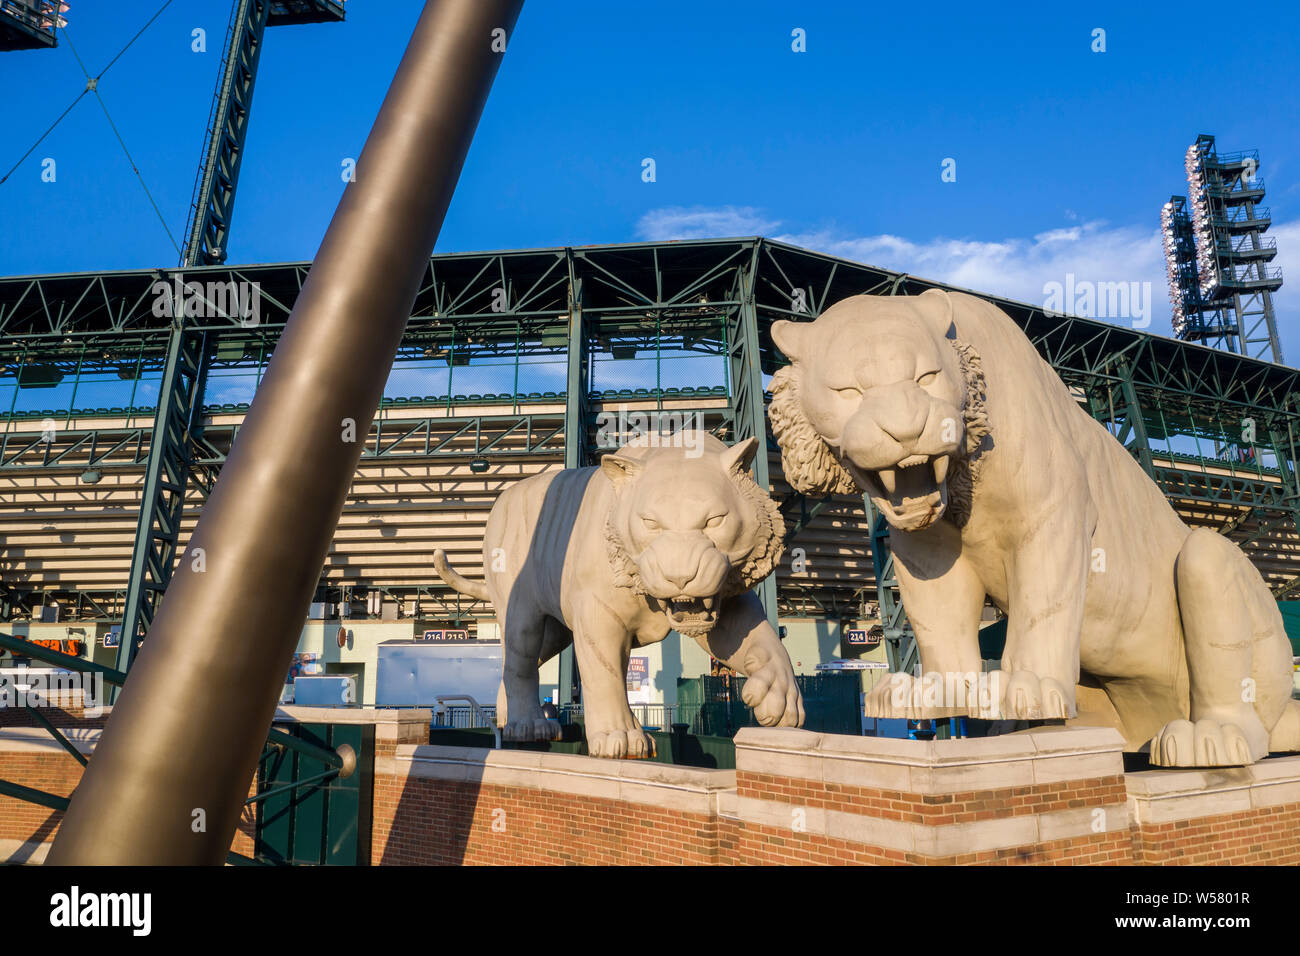 Detroit, Michigan - Concrete tigers above the entrance to Comerica Park, home of the Detroit Tigers major league baseball team. Stock Photo